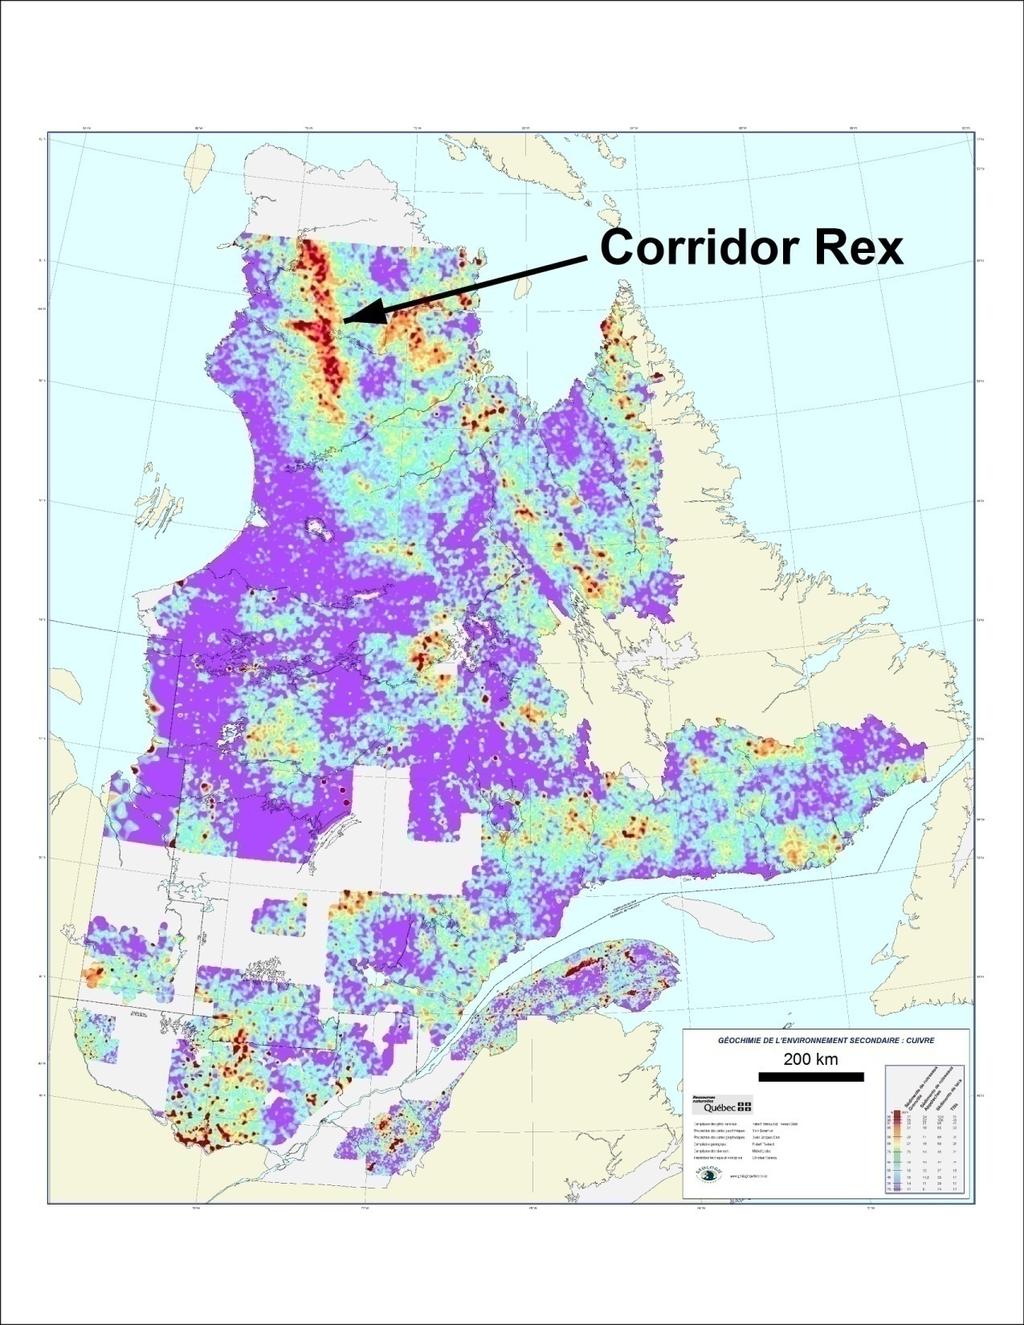 Rex Trend Quebec-scale Copper footprint Lake-bottom sediment anomaly 330